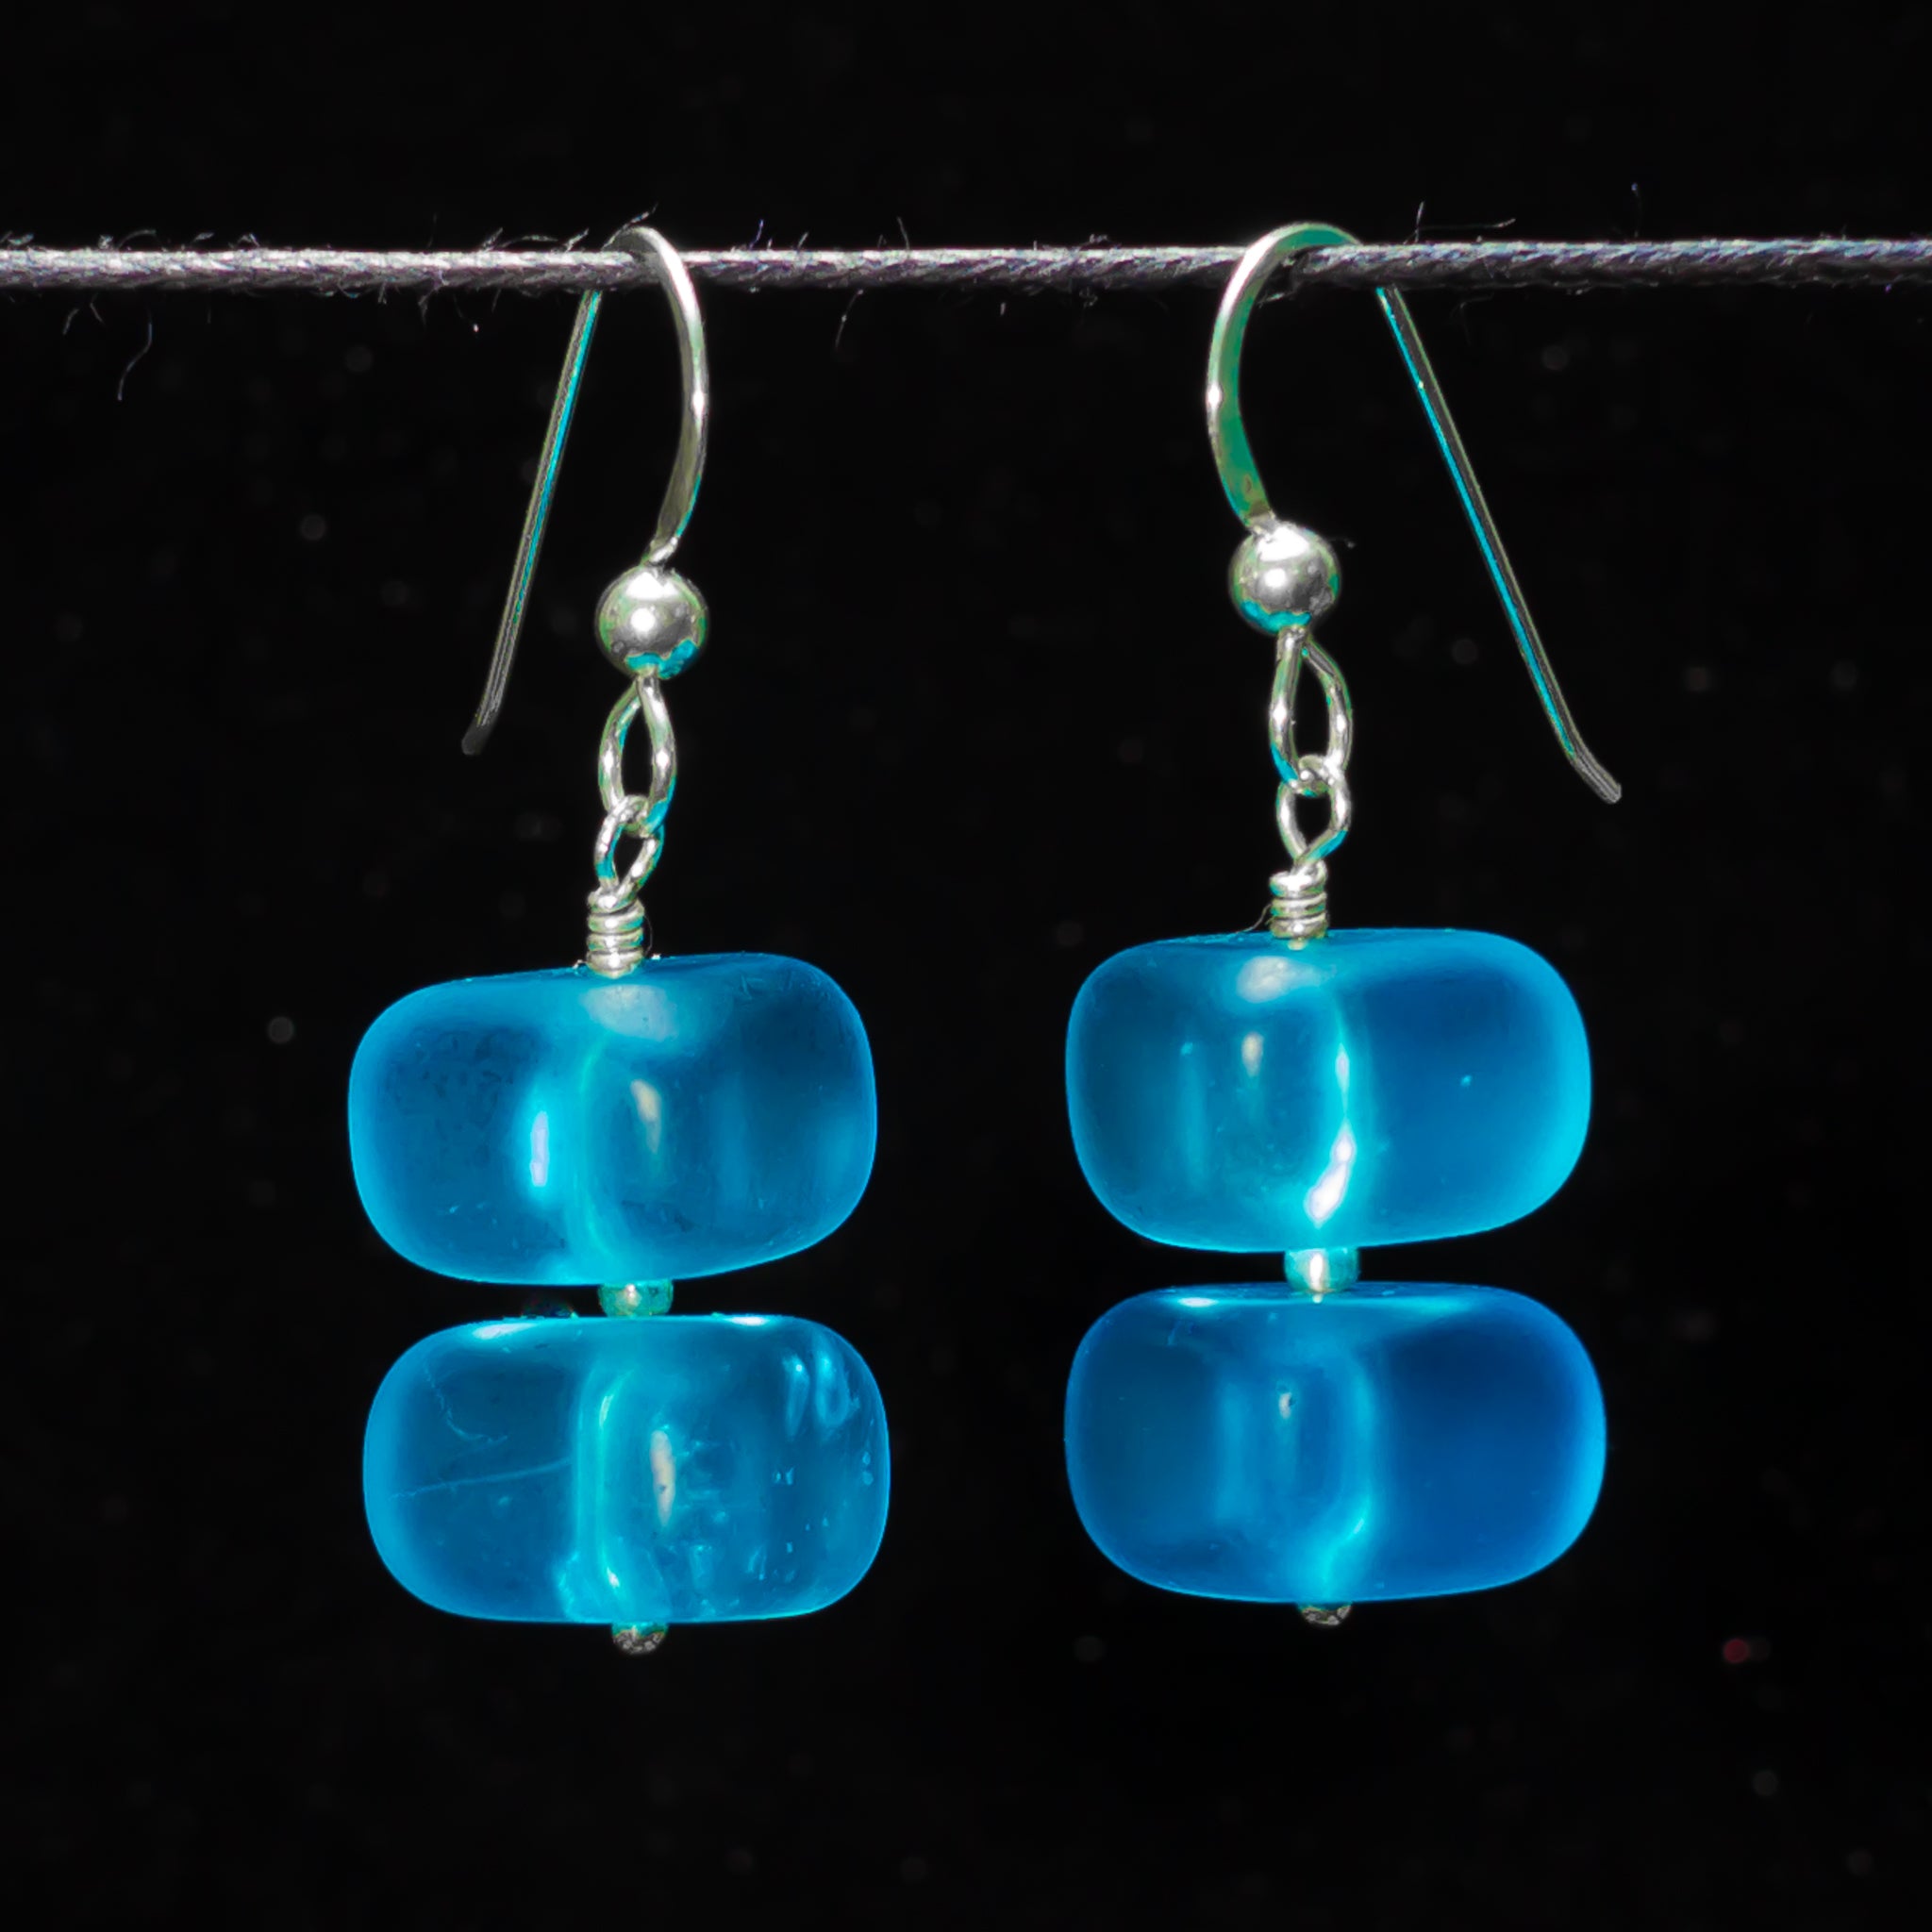 Blue Frosted glass earrings